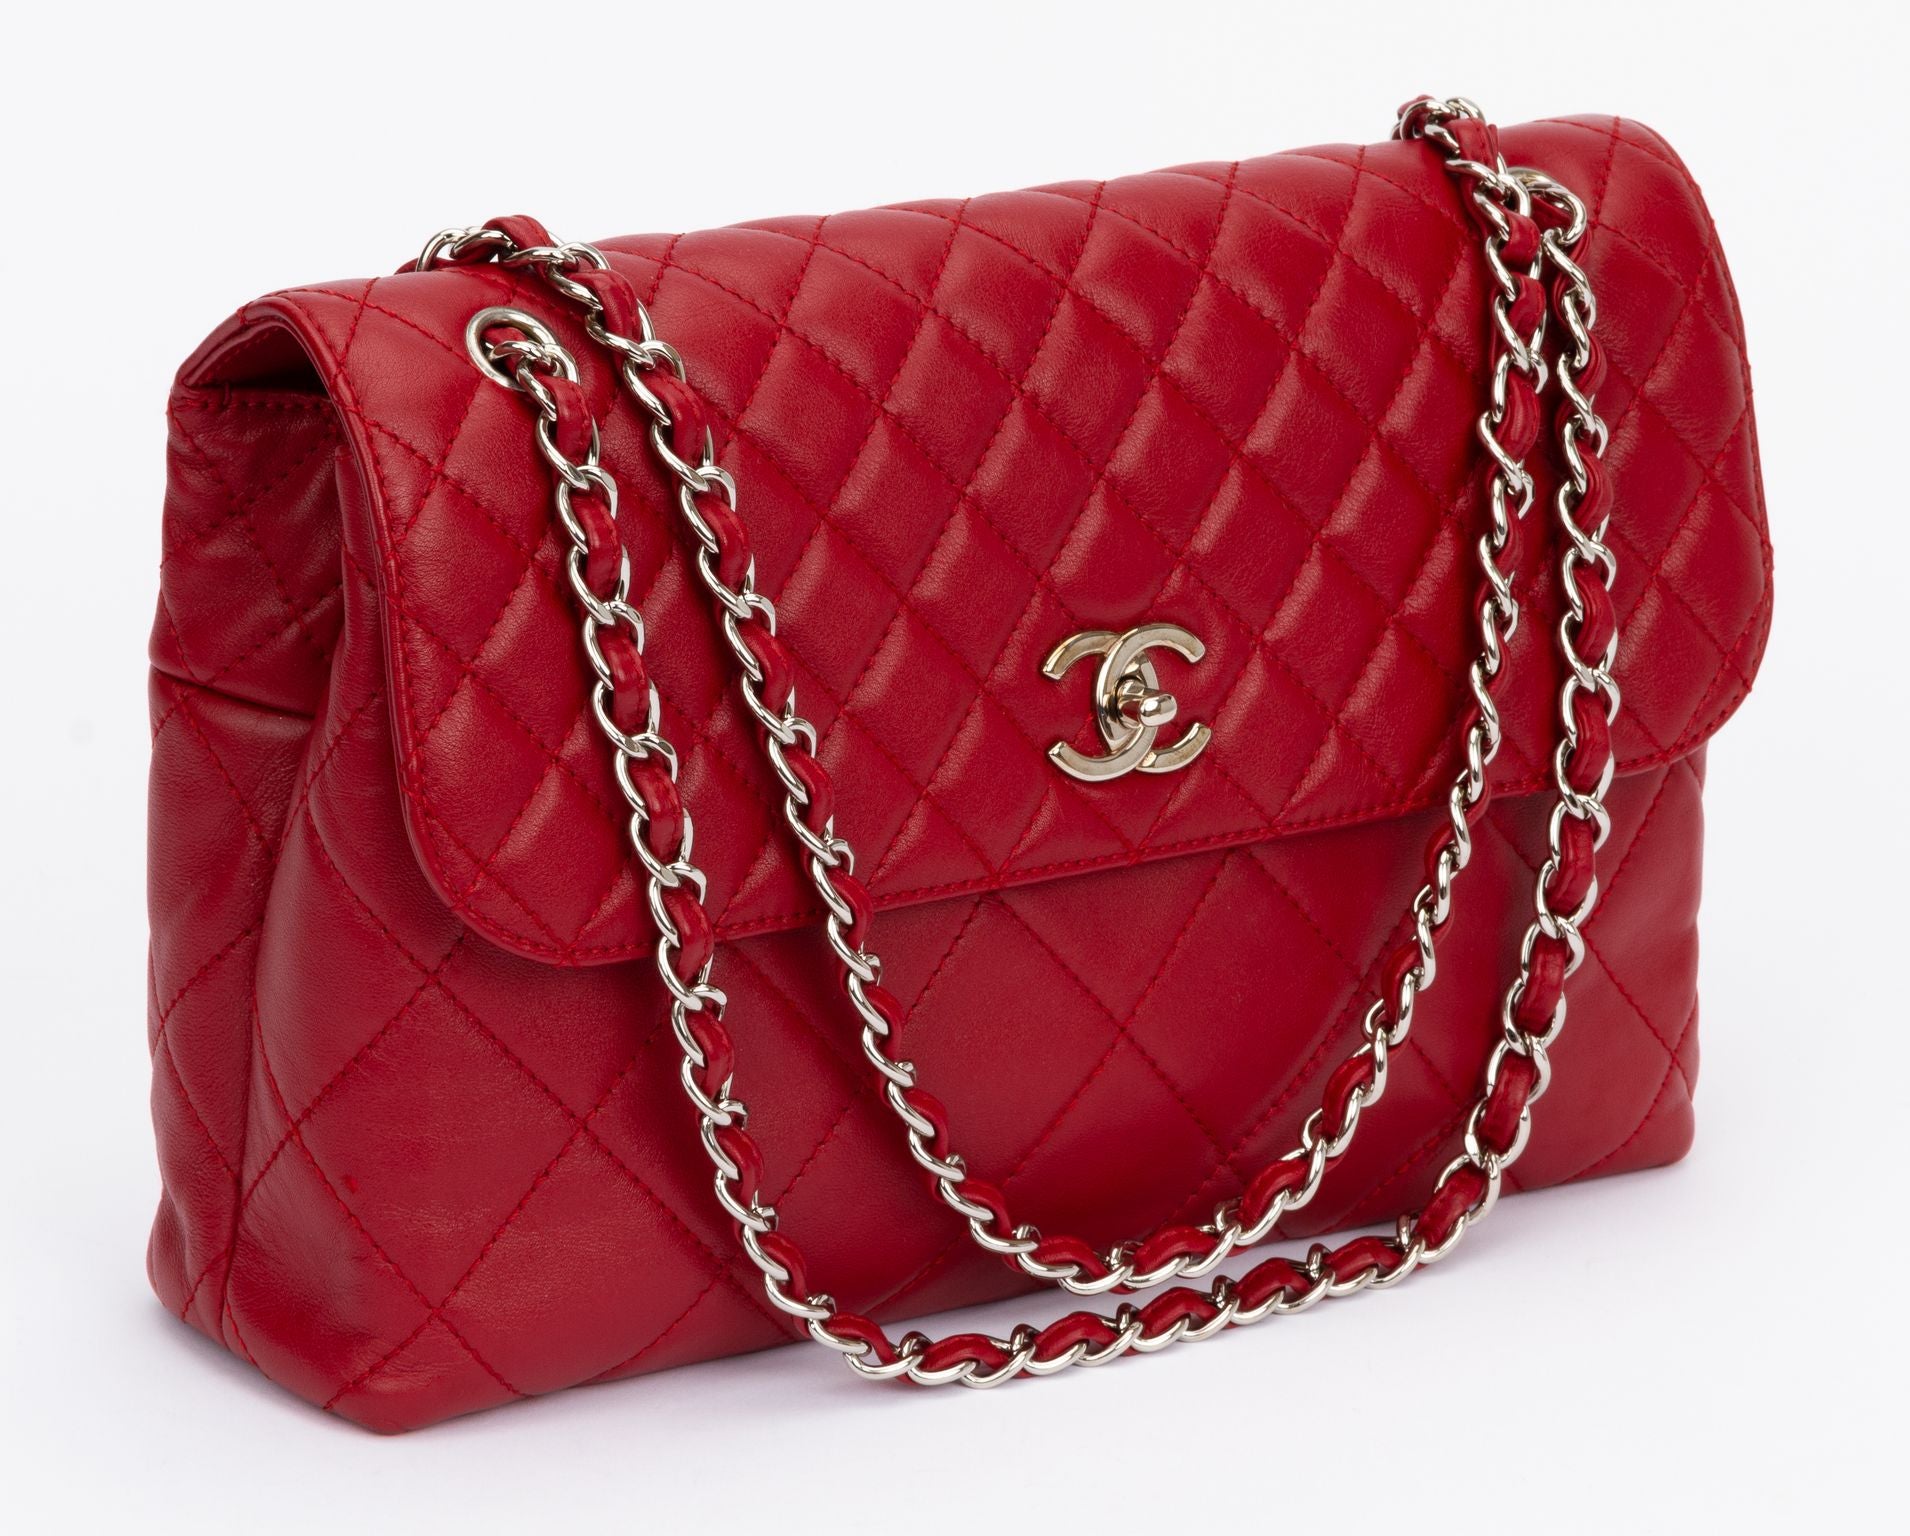 CHANEL Briefcase Business Hand Bag Purse Red Caviar Skin France 52108